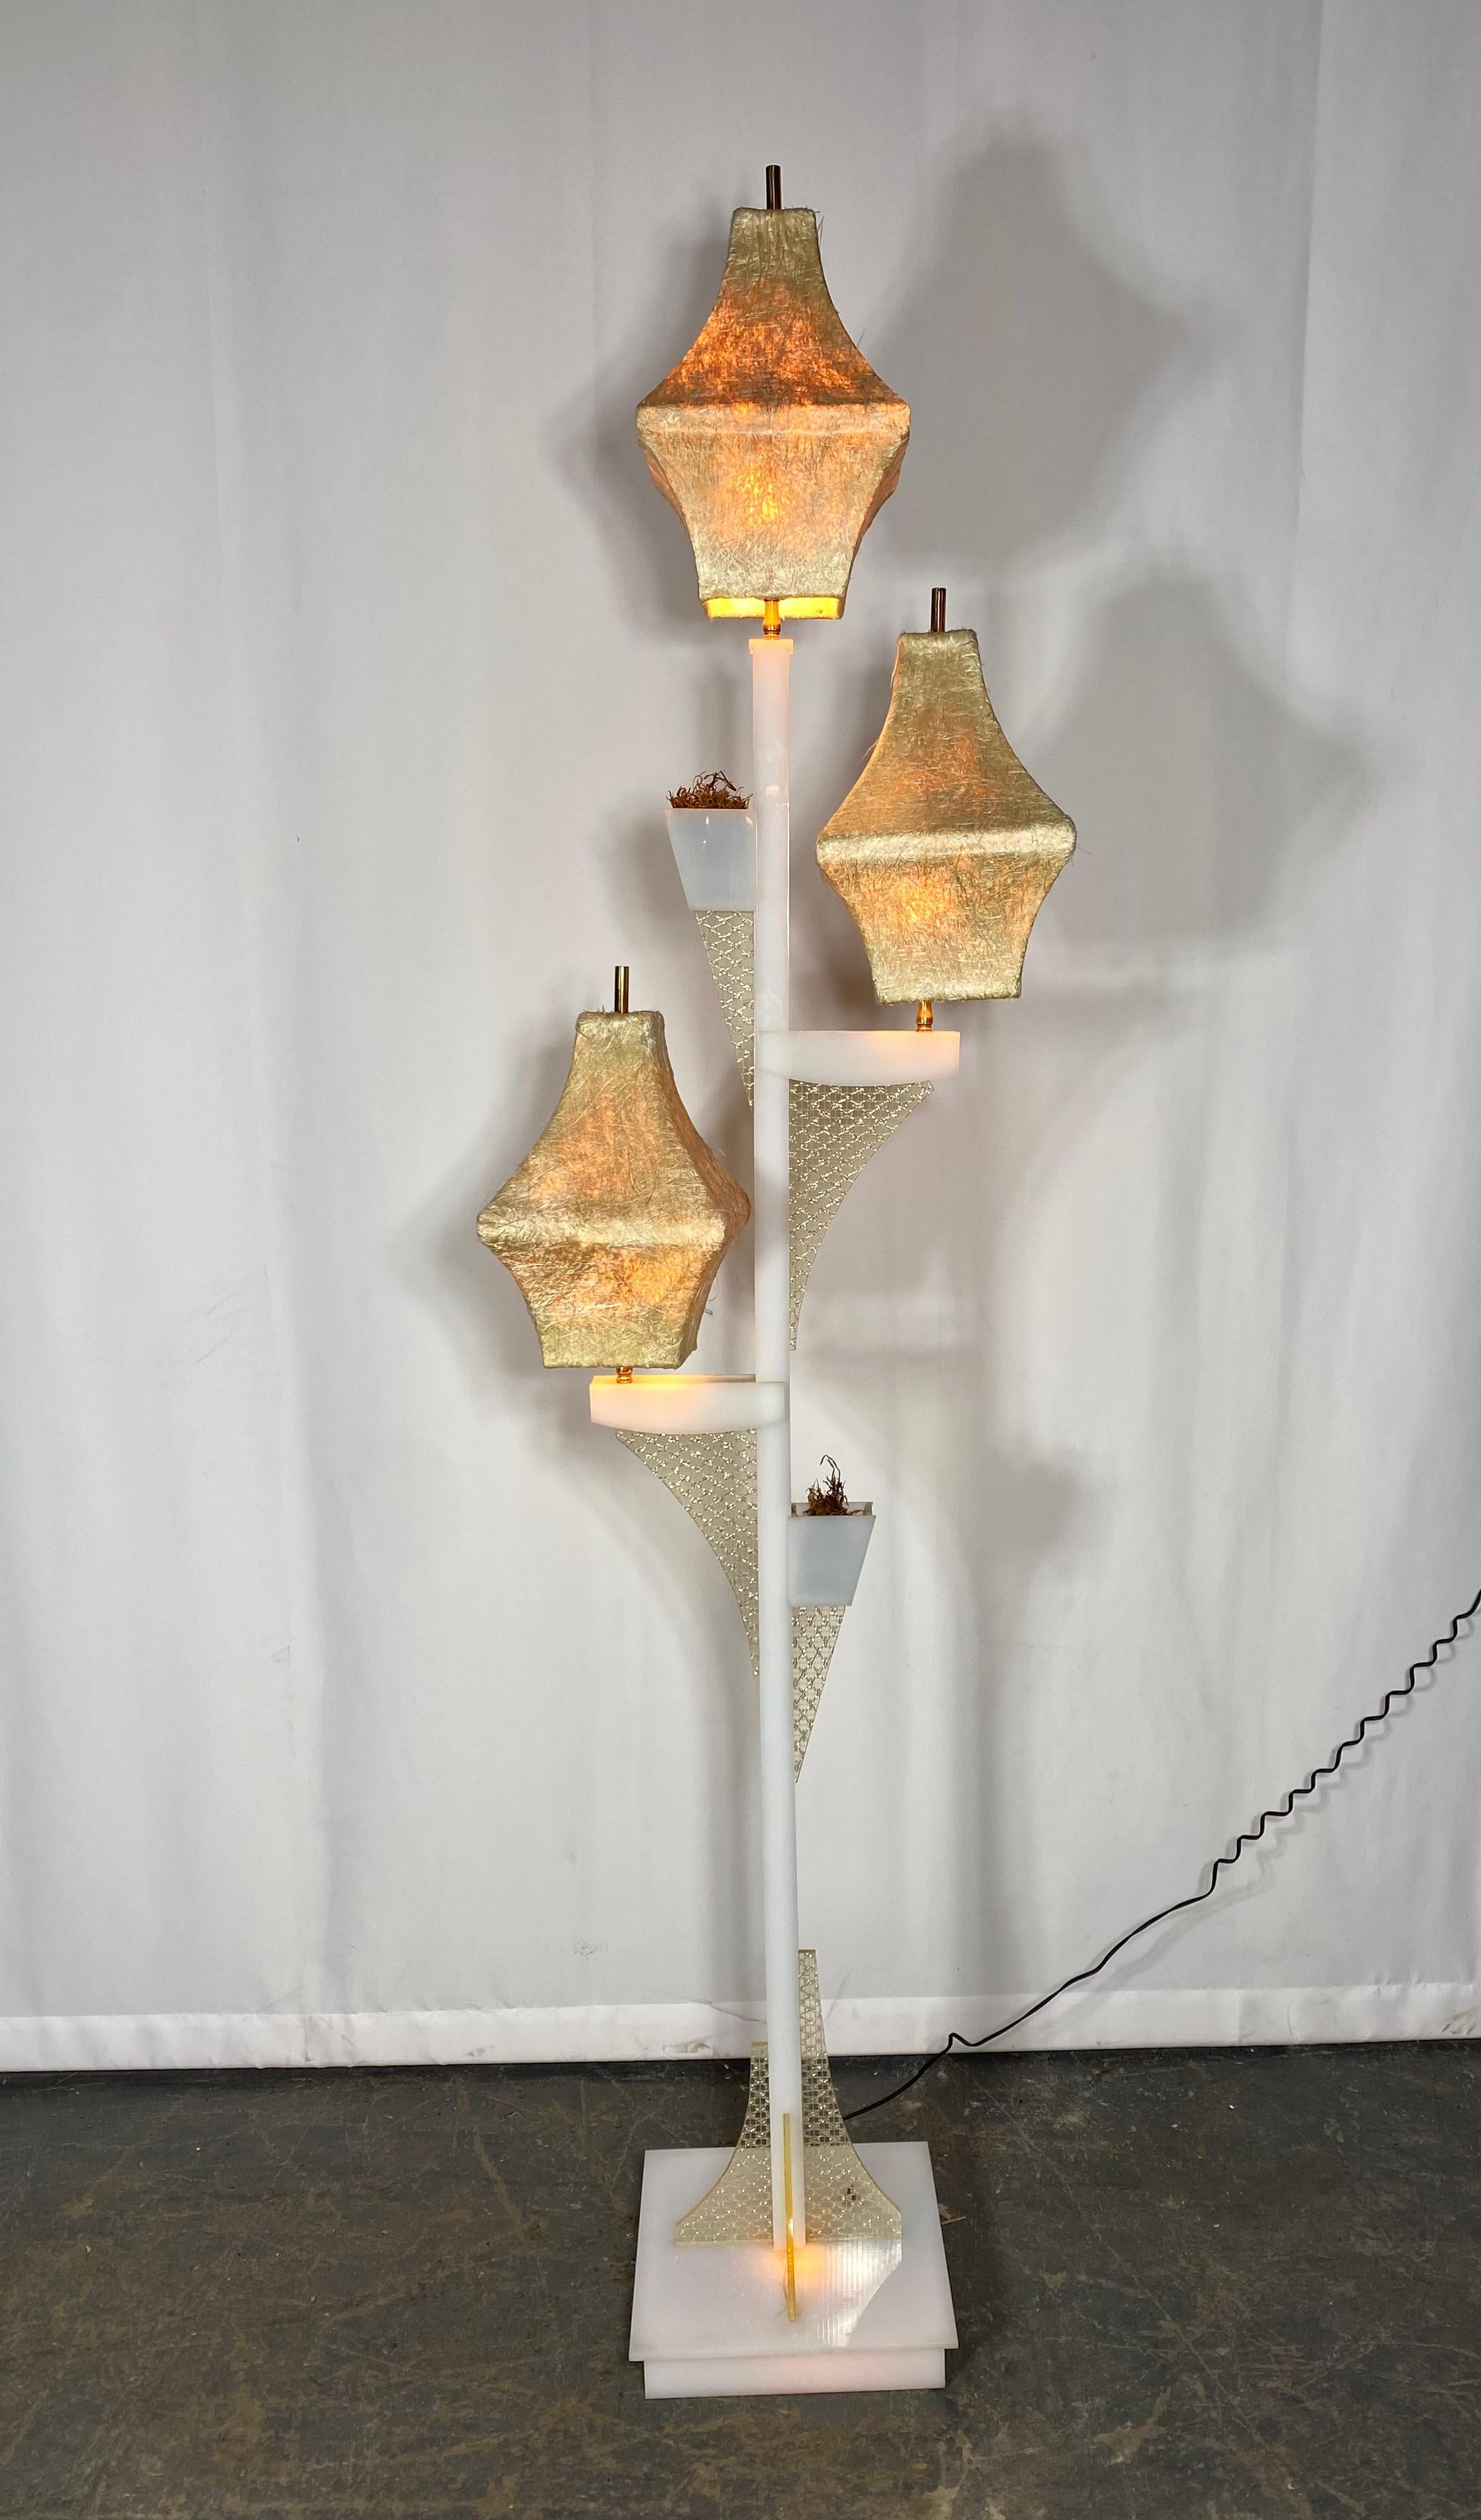 Rare Moss Triple Shade Acrylic / Lucite Floor Lamp, classic mid century modern In Good Condition For Sale In Buffalo, NY